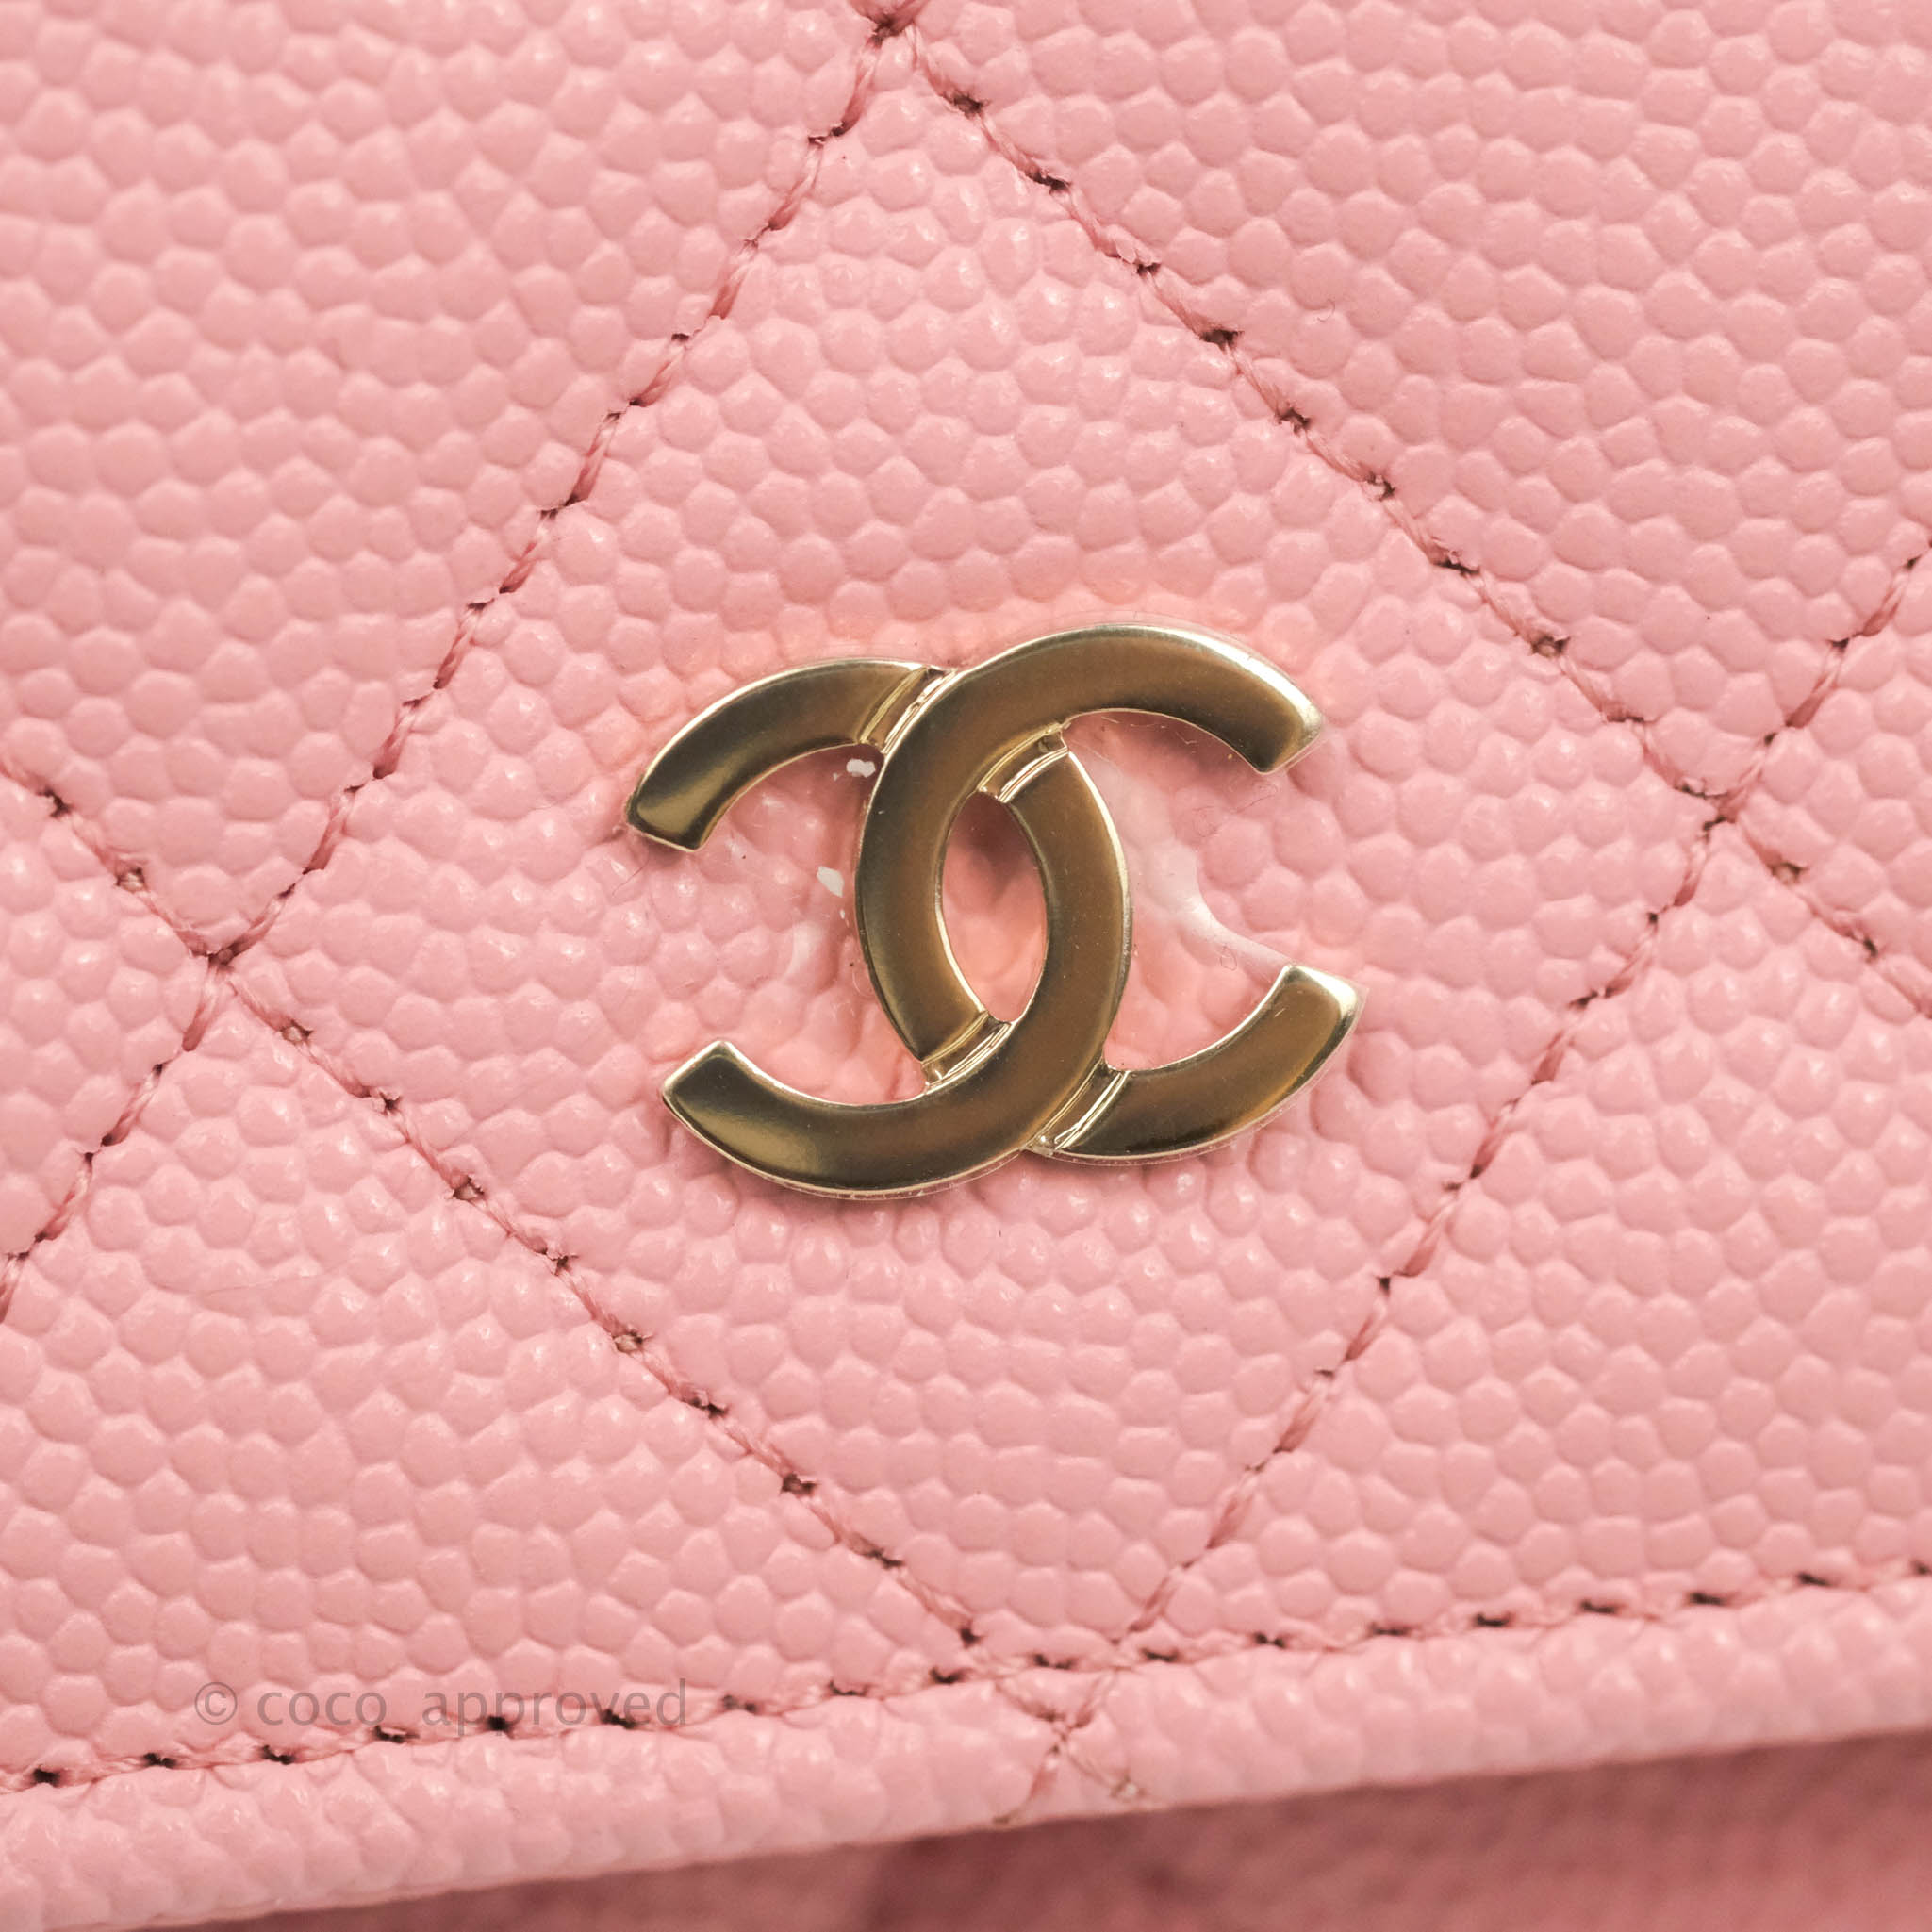 Chanel – Page 3 – Coco Approved Studio